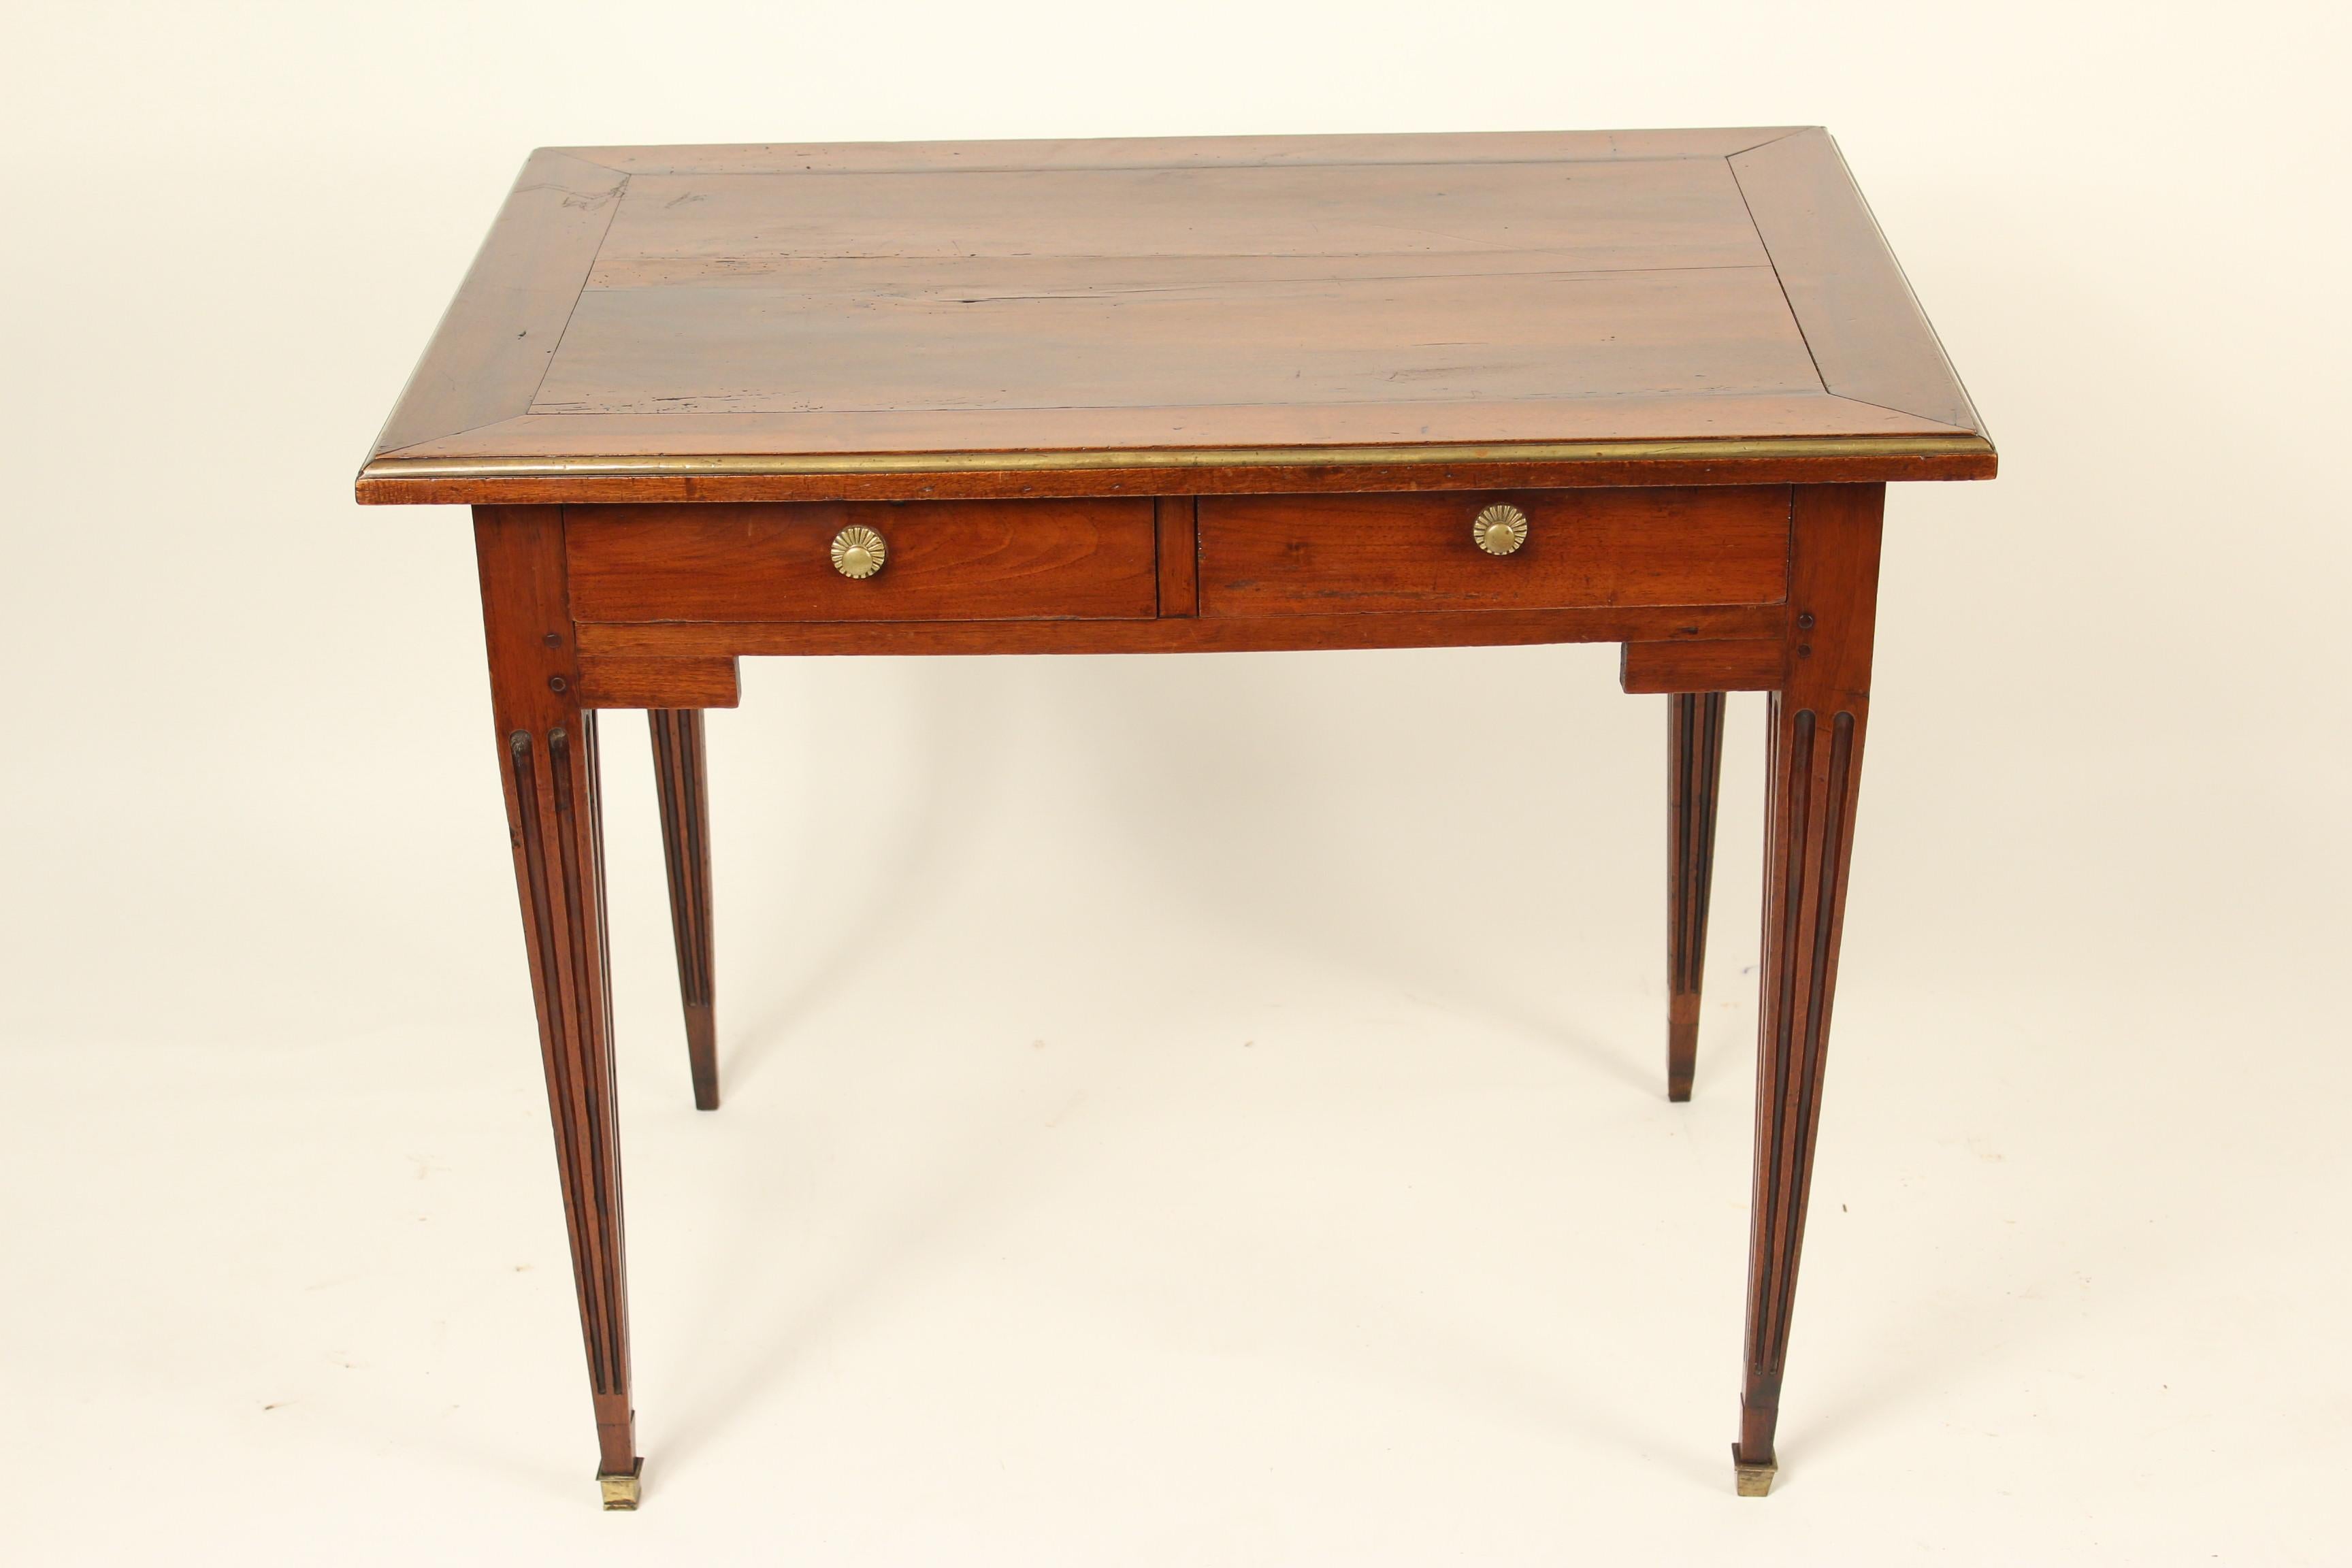 Louis XVI mahogany writing table / occasional table, circa 1800. Mahogany has nice old patina, the top has brass trim going around it.